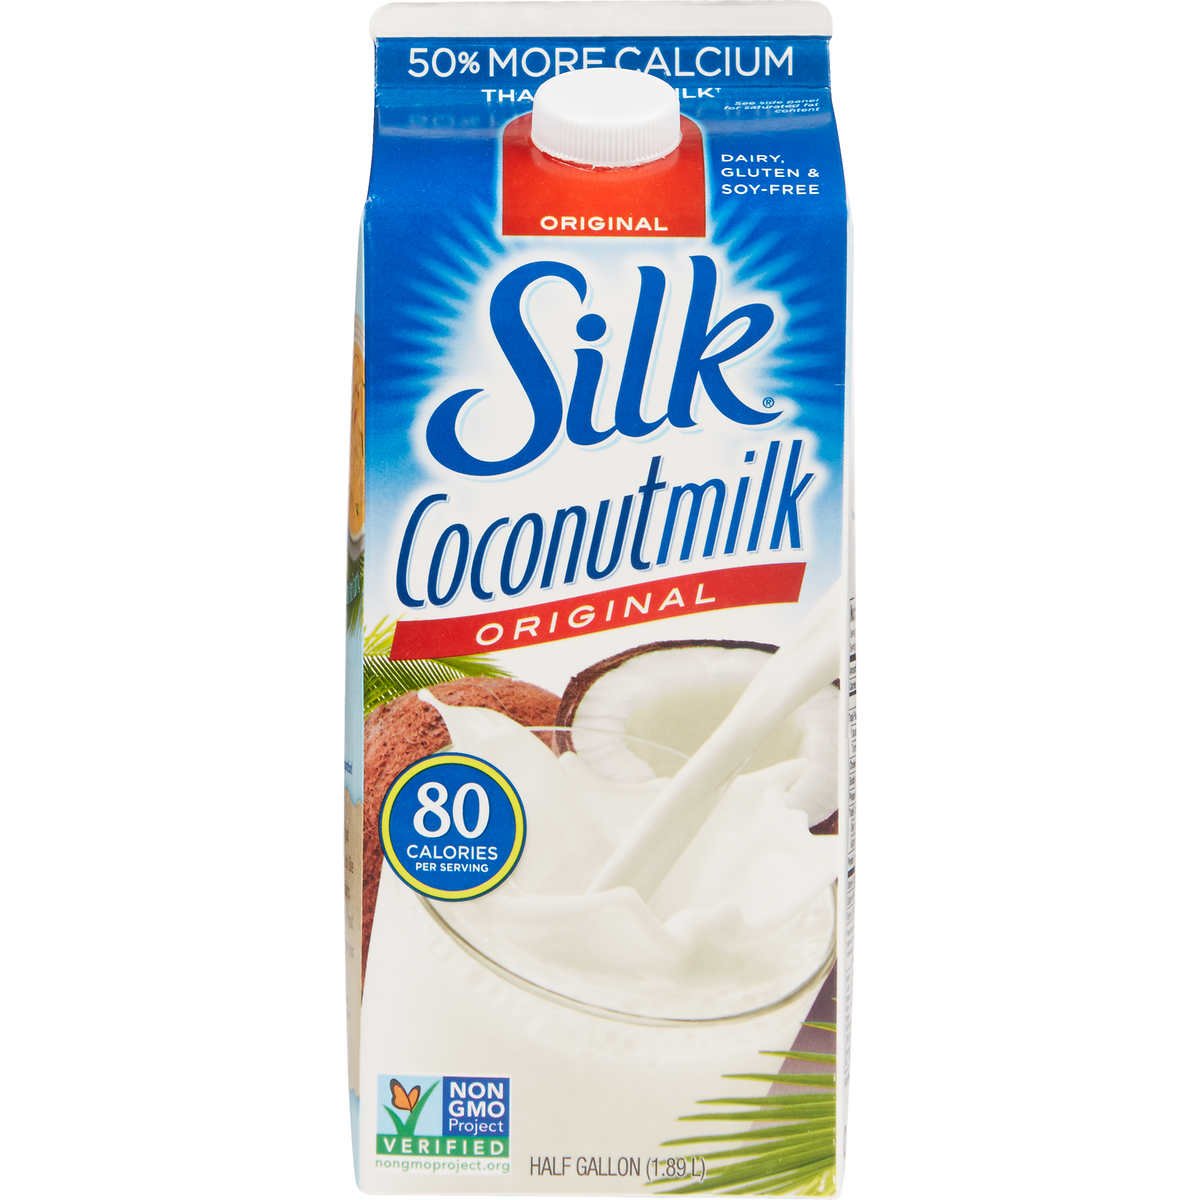 My mom over here scaring me to drink more Coconut milk because Oatmilk is bad for you. BITCH THE COCONUTMILK HAS A HIGHER FAT CONTENT AND ALMOSTM ADE ME PUKE FUCK YOU MEAN?